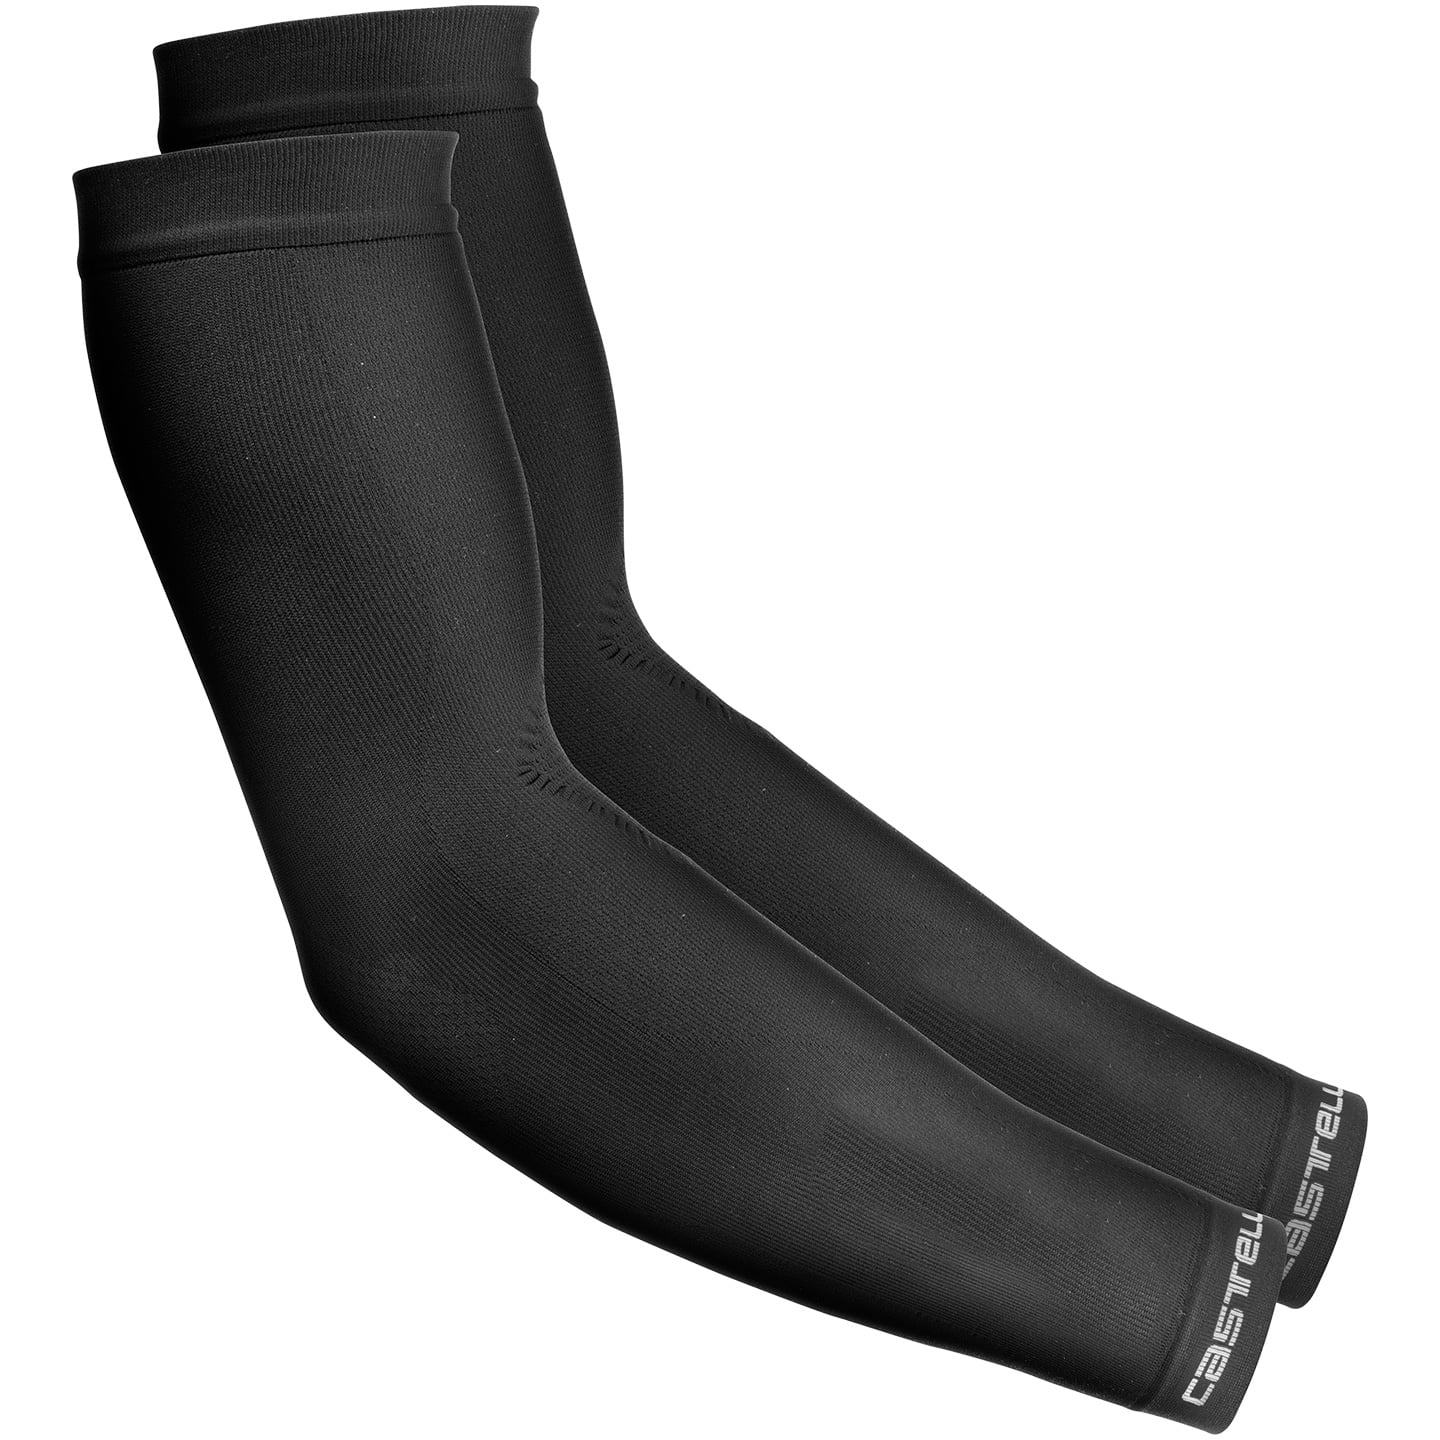 Pro Seamless Arm Warmers Arm Warmers, for men, size L-XL, Cycling clothing